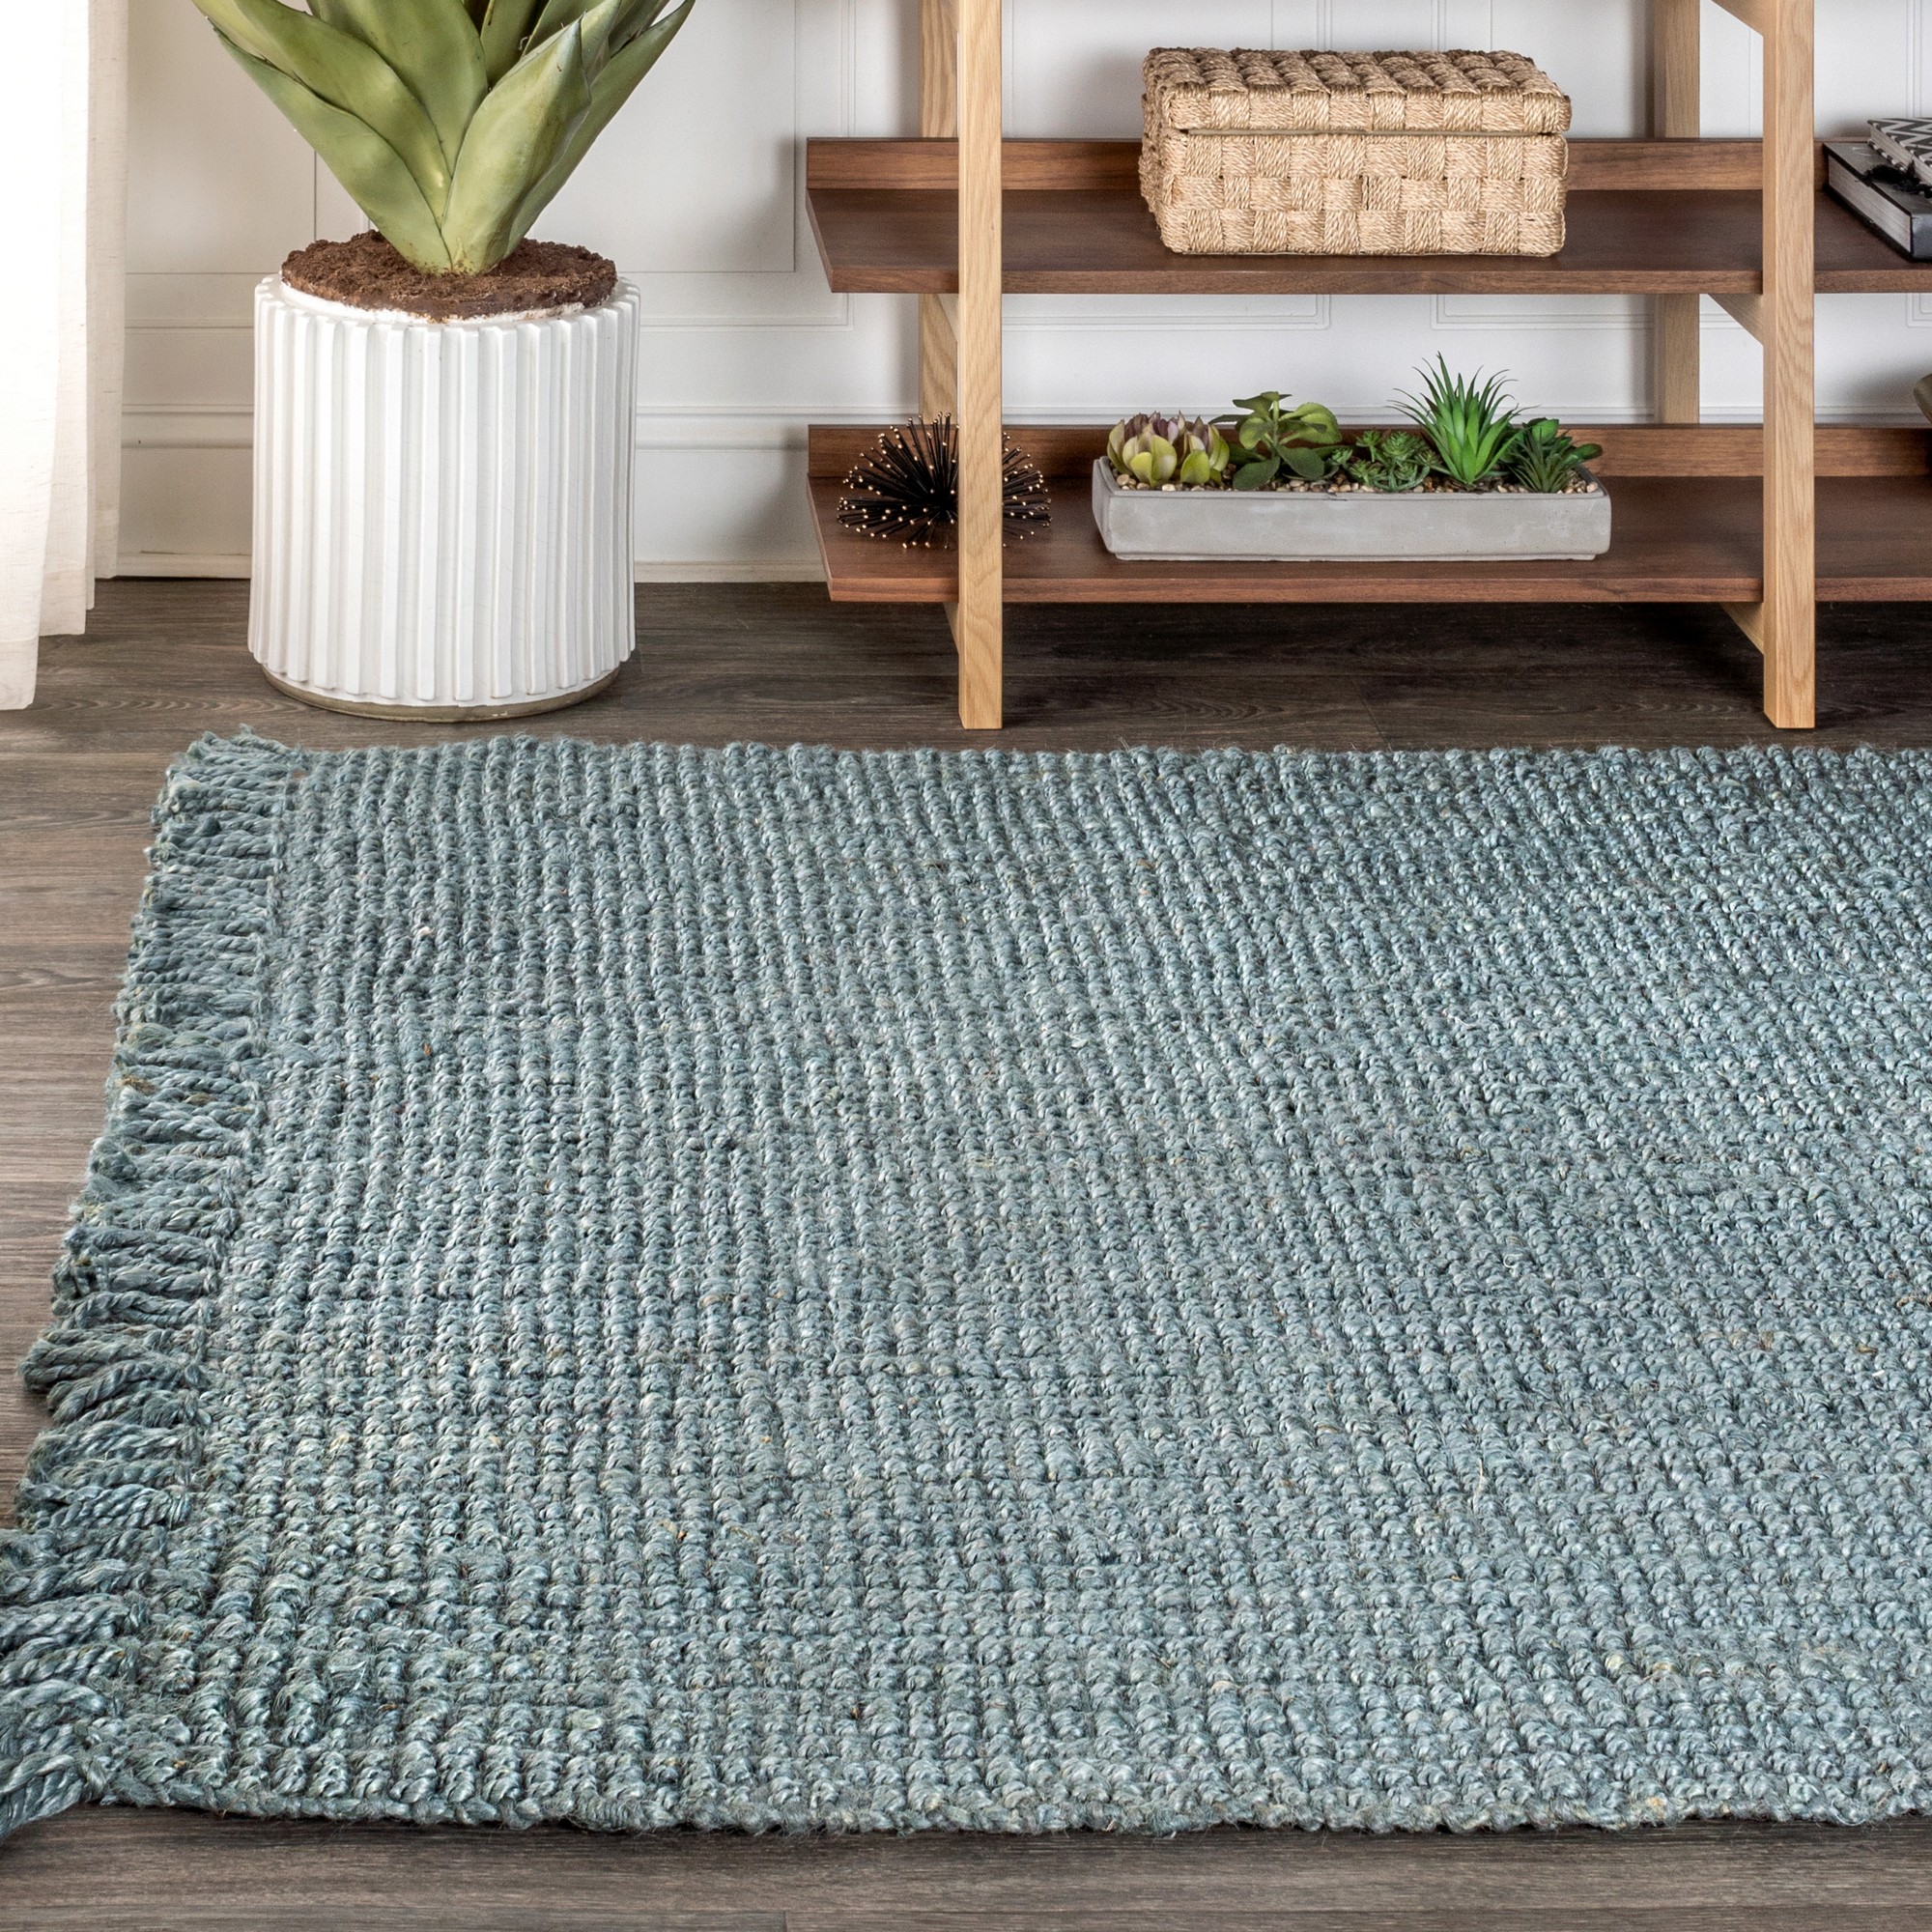 2'x8' Para Hand Woven Chunky Jute with Fringe Runner Rug, Natural -  JONATHAN Y